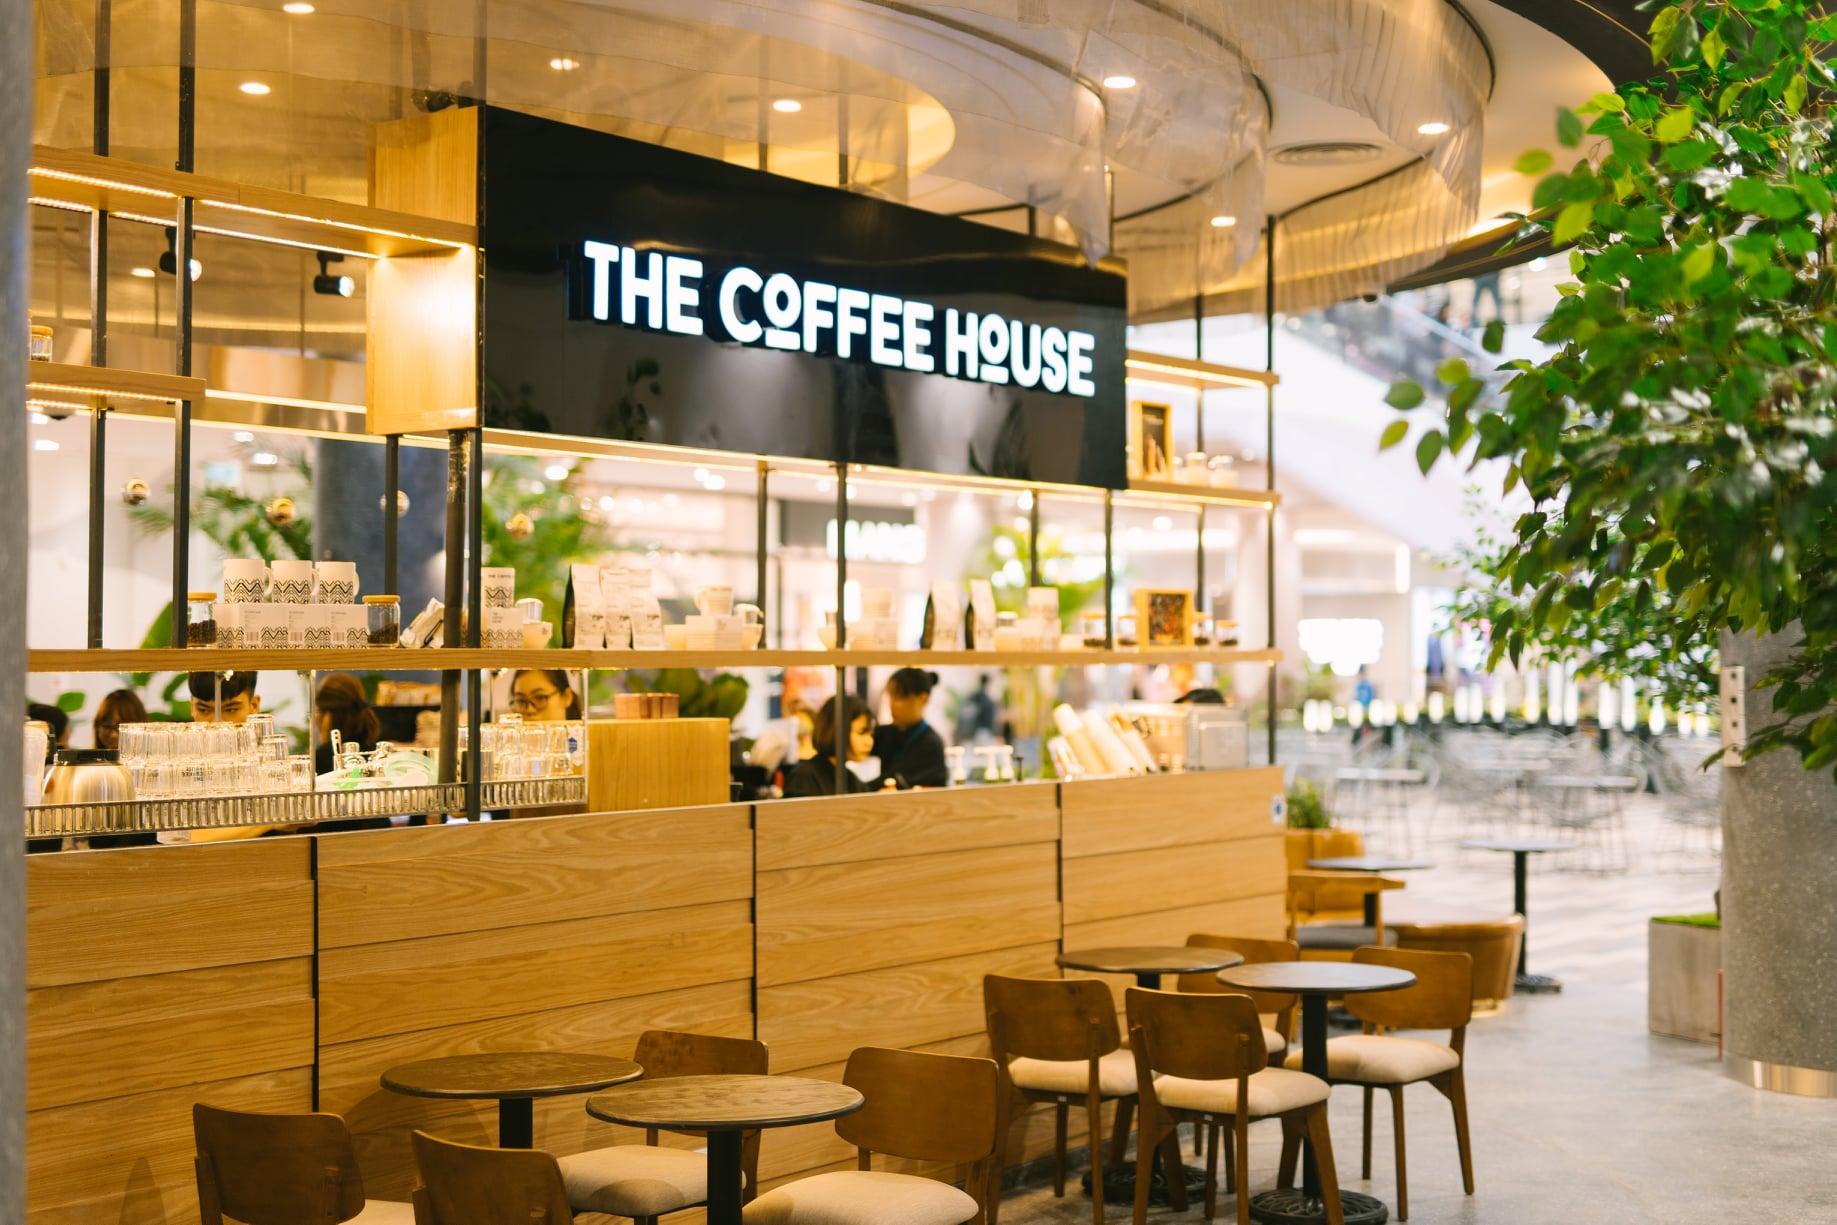 The Coffee House stands out as one of the best coffee shops in Hanoi